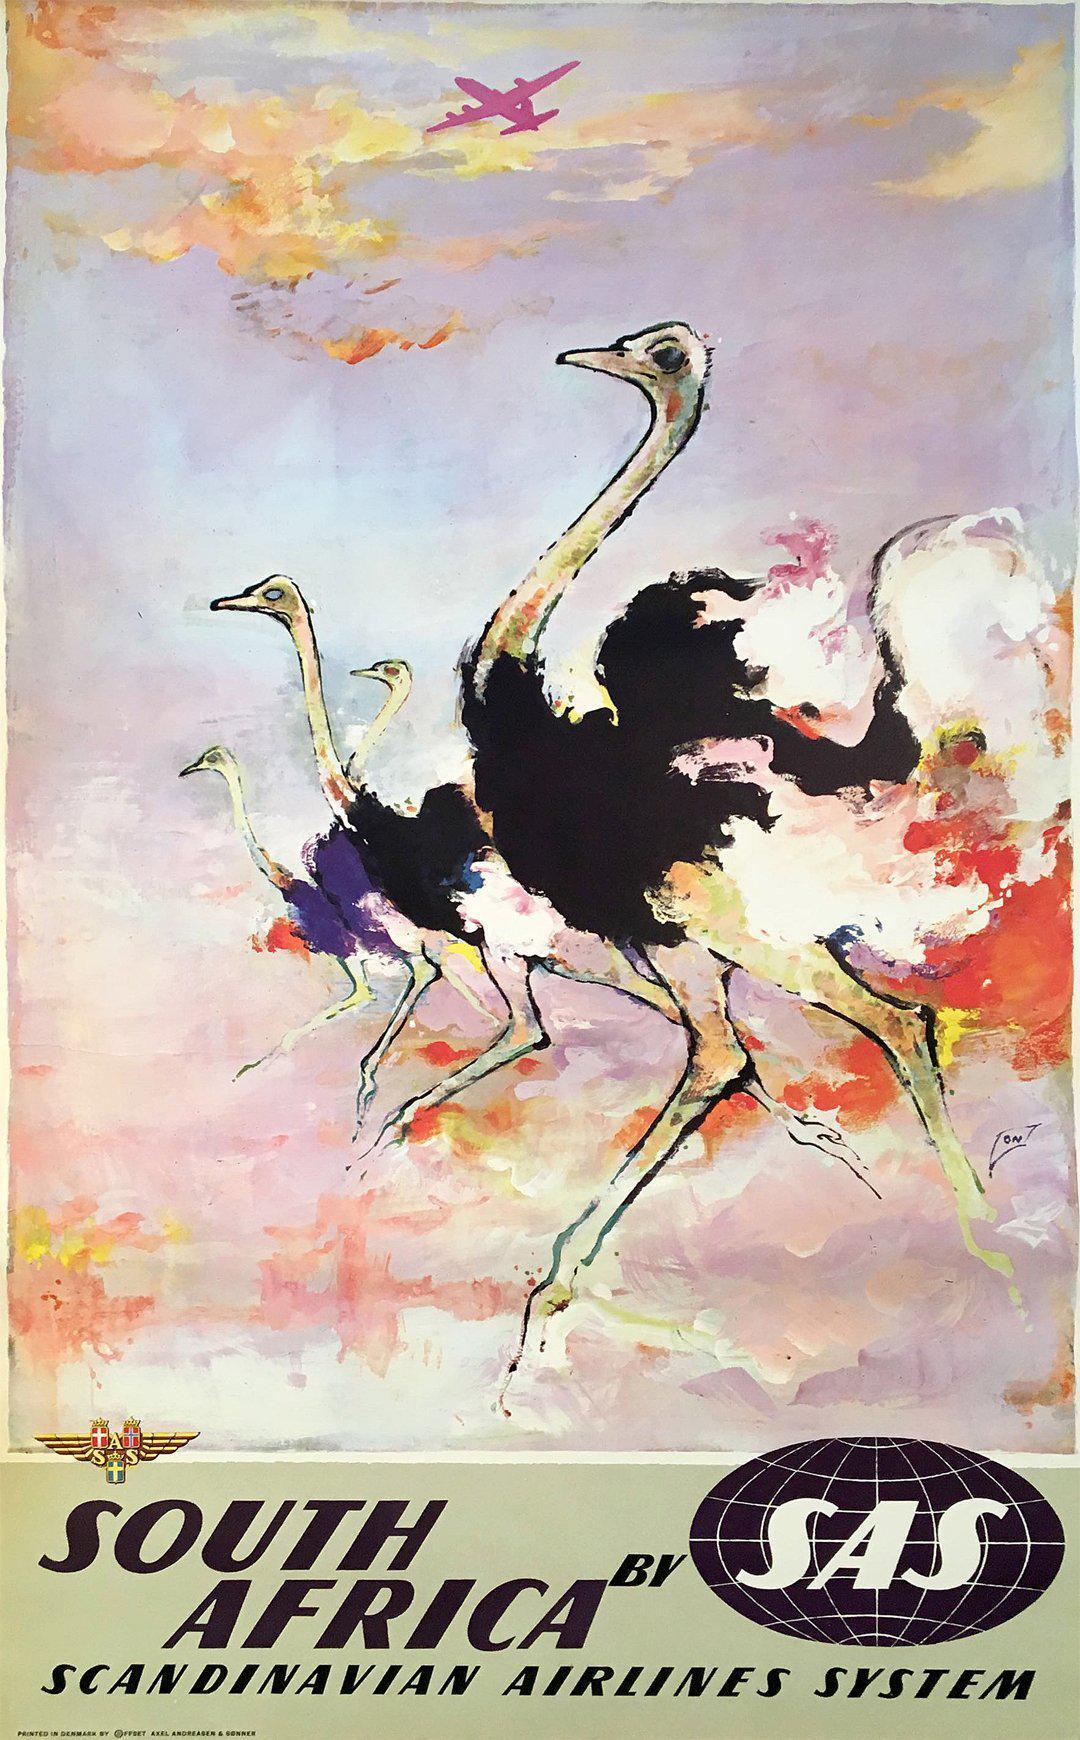 Authentic Vintage Poster c1955 for SAS - South Africa Ostriches by Otto Nielsen